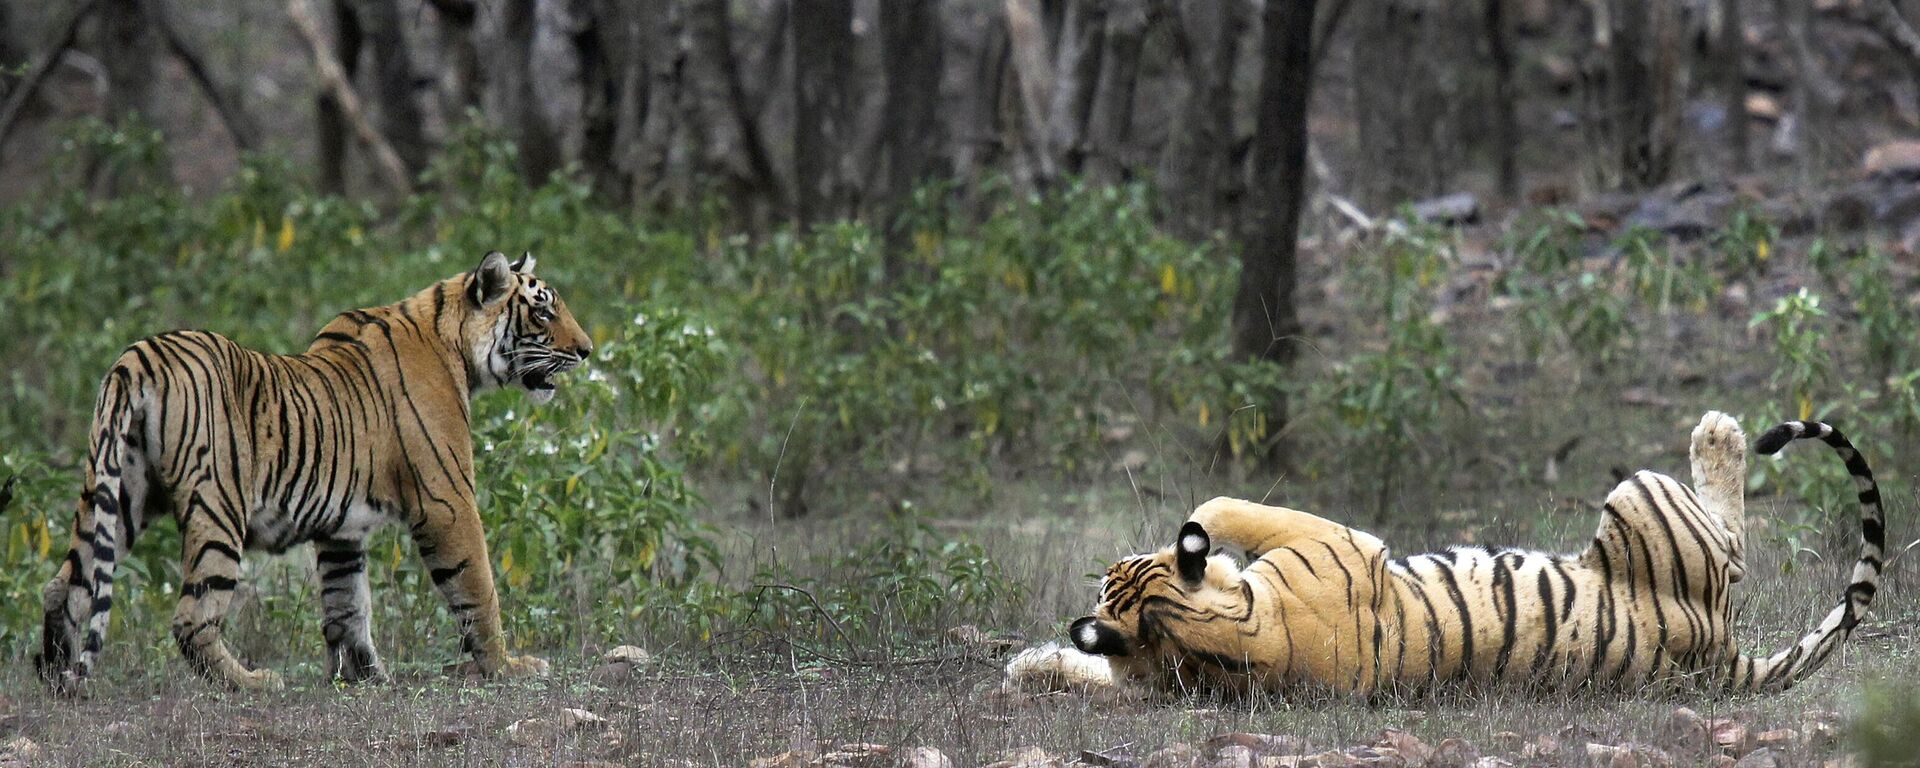 FILE - Tigers are visible at the Ranthambore National Park in Sawai Madhopur, India on April 12, 2015. India will celebrate 50 years of tiger conservation on April 9, 2023, with Modi set to announce tiger population numbers at an event in Mysuru in Karnataka.  - Sputnik India, 1920, 10.07.2023